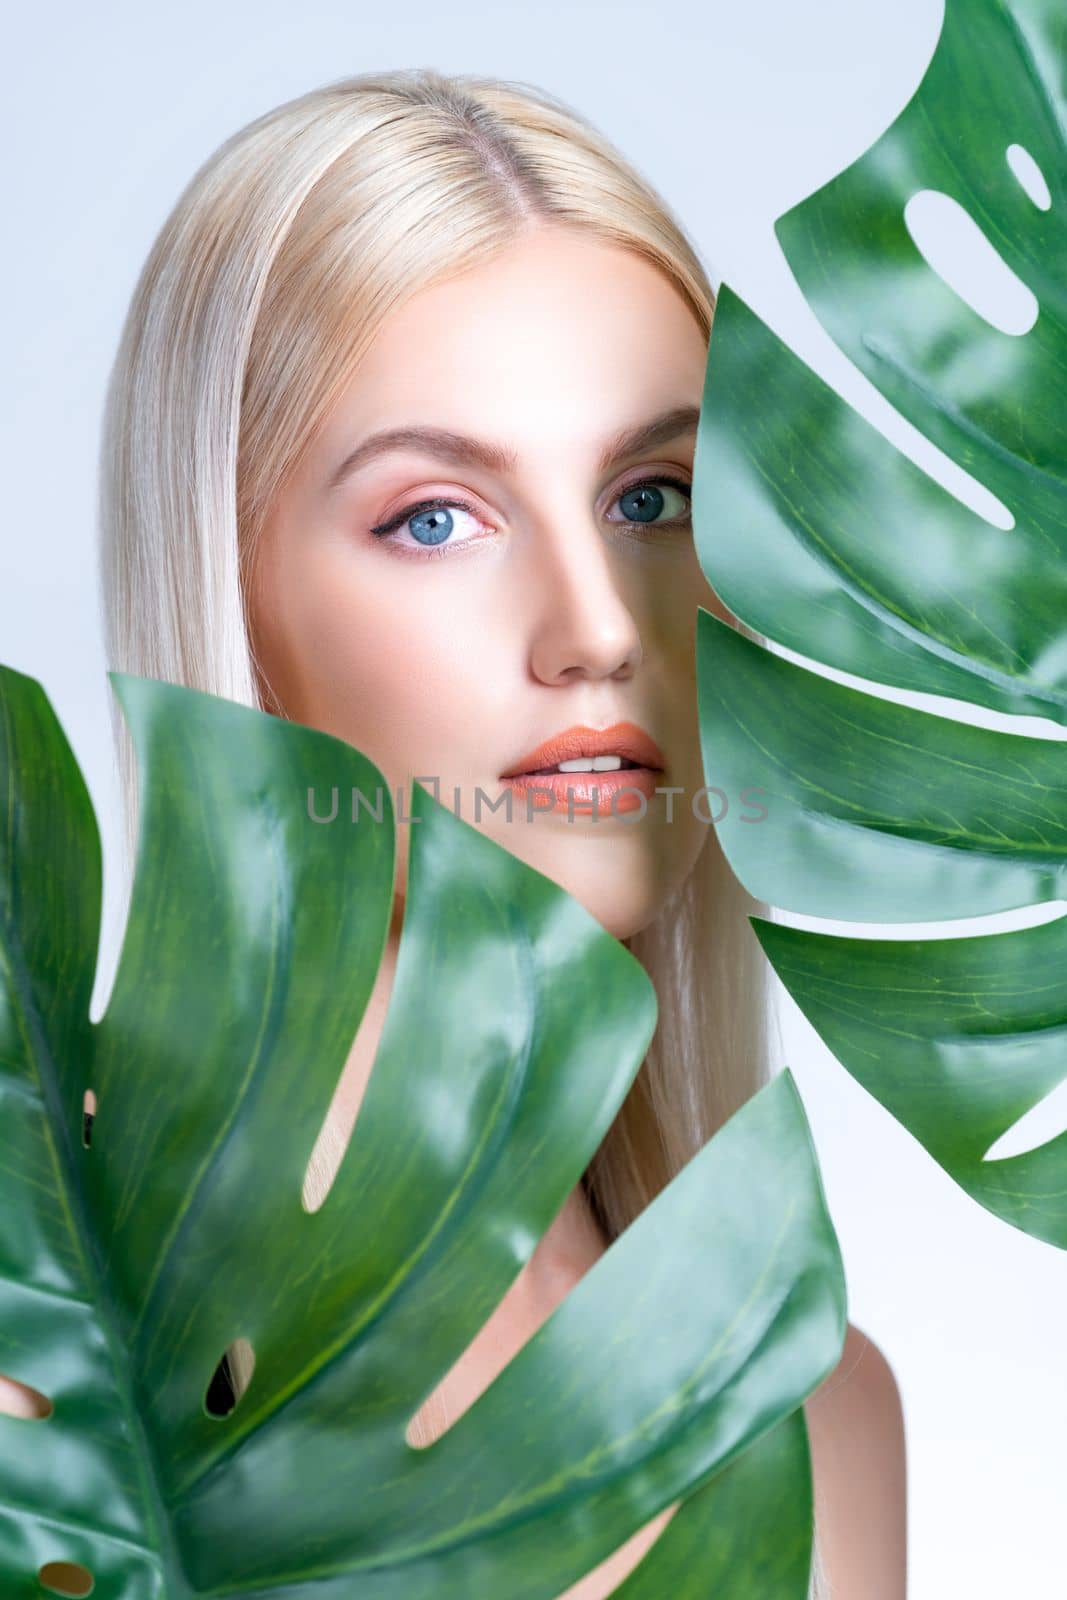 Closeup facial portrait personable woman holding green monstera. by biancoblue